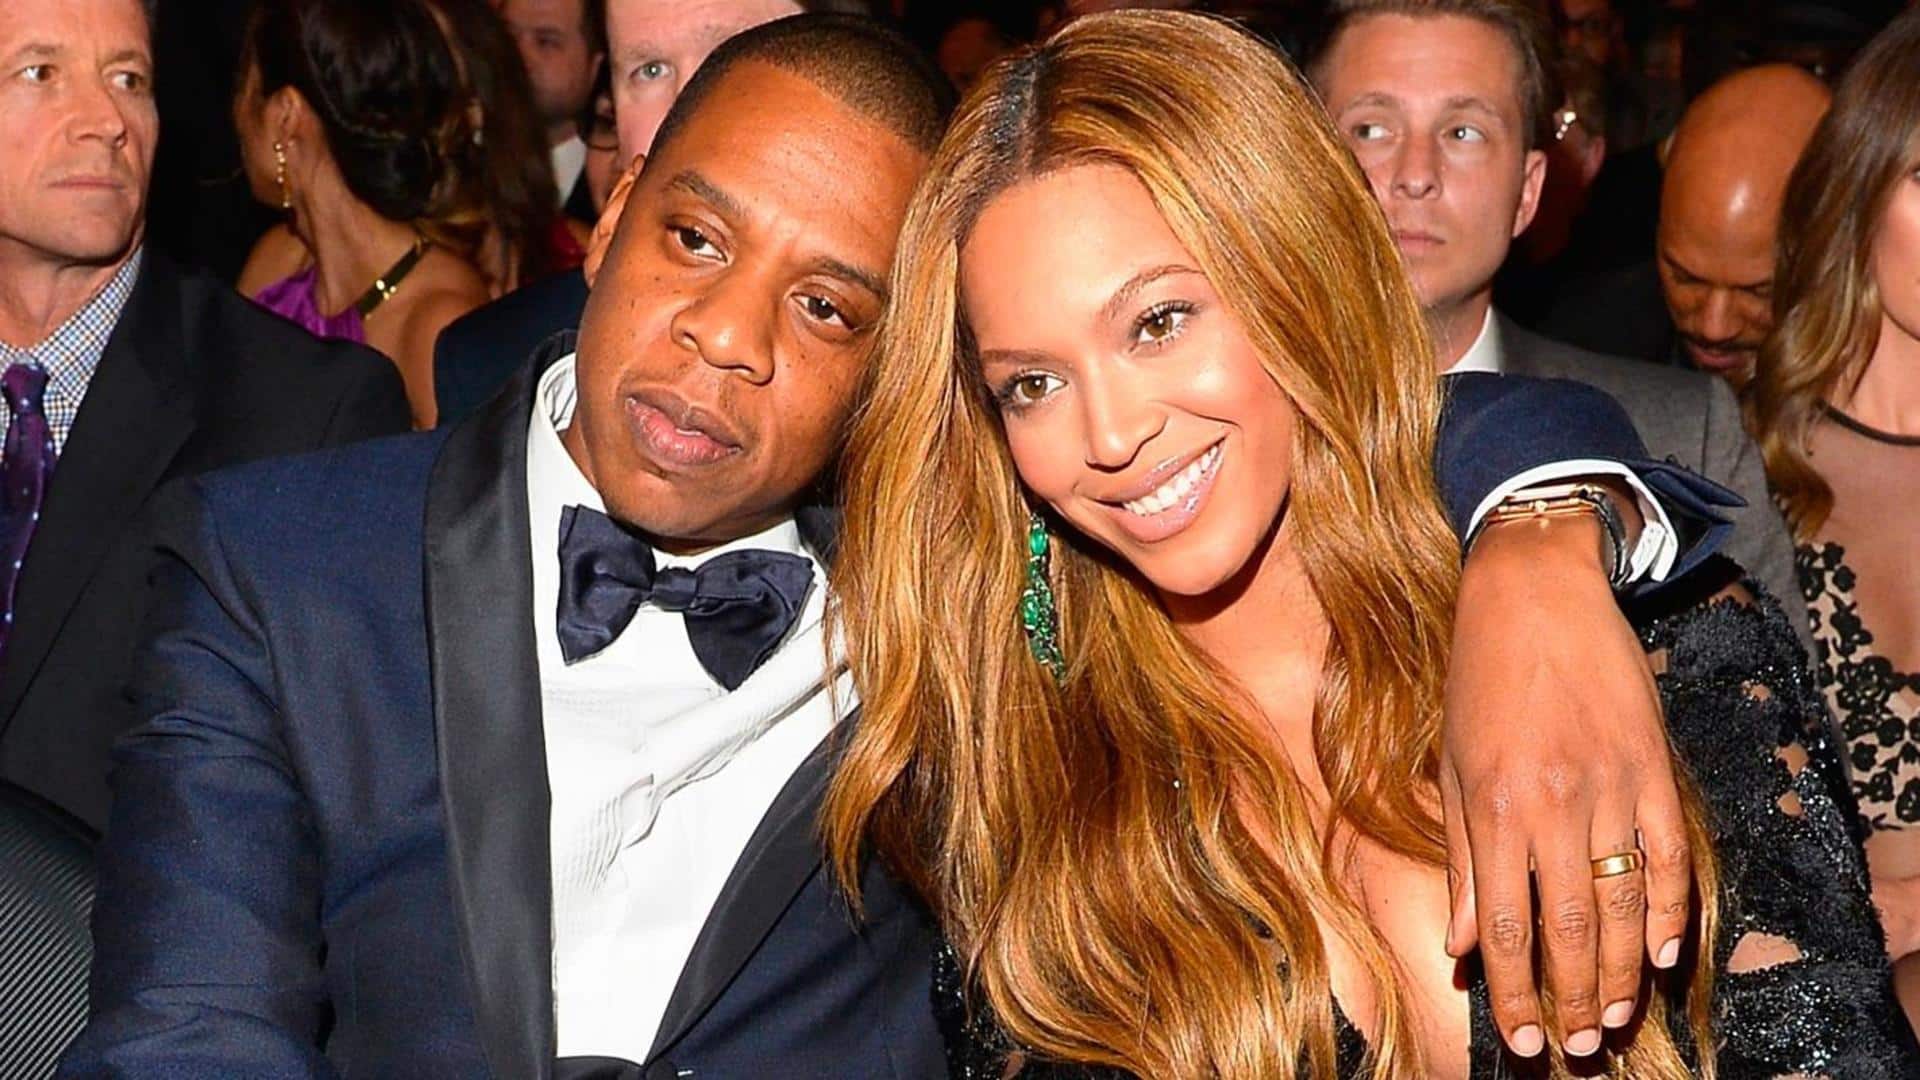 Beyonce, Jay-Z purchase California's most expensive property for $200M